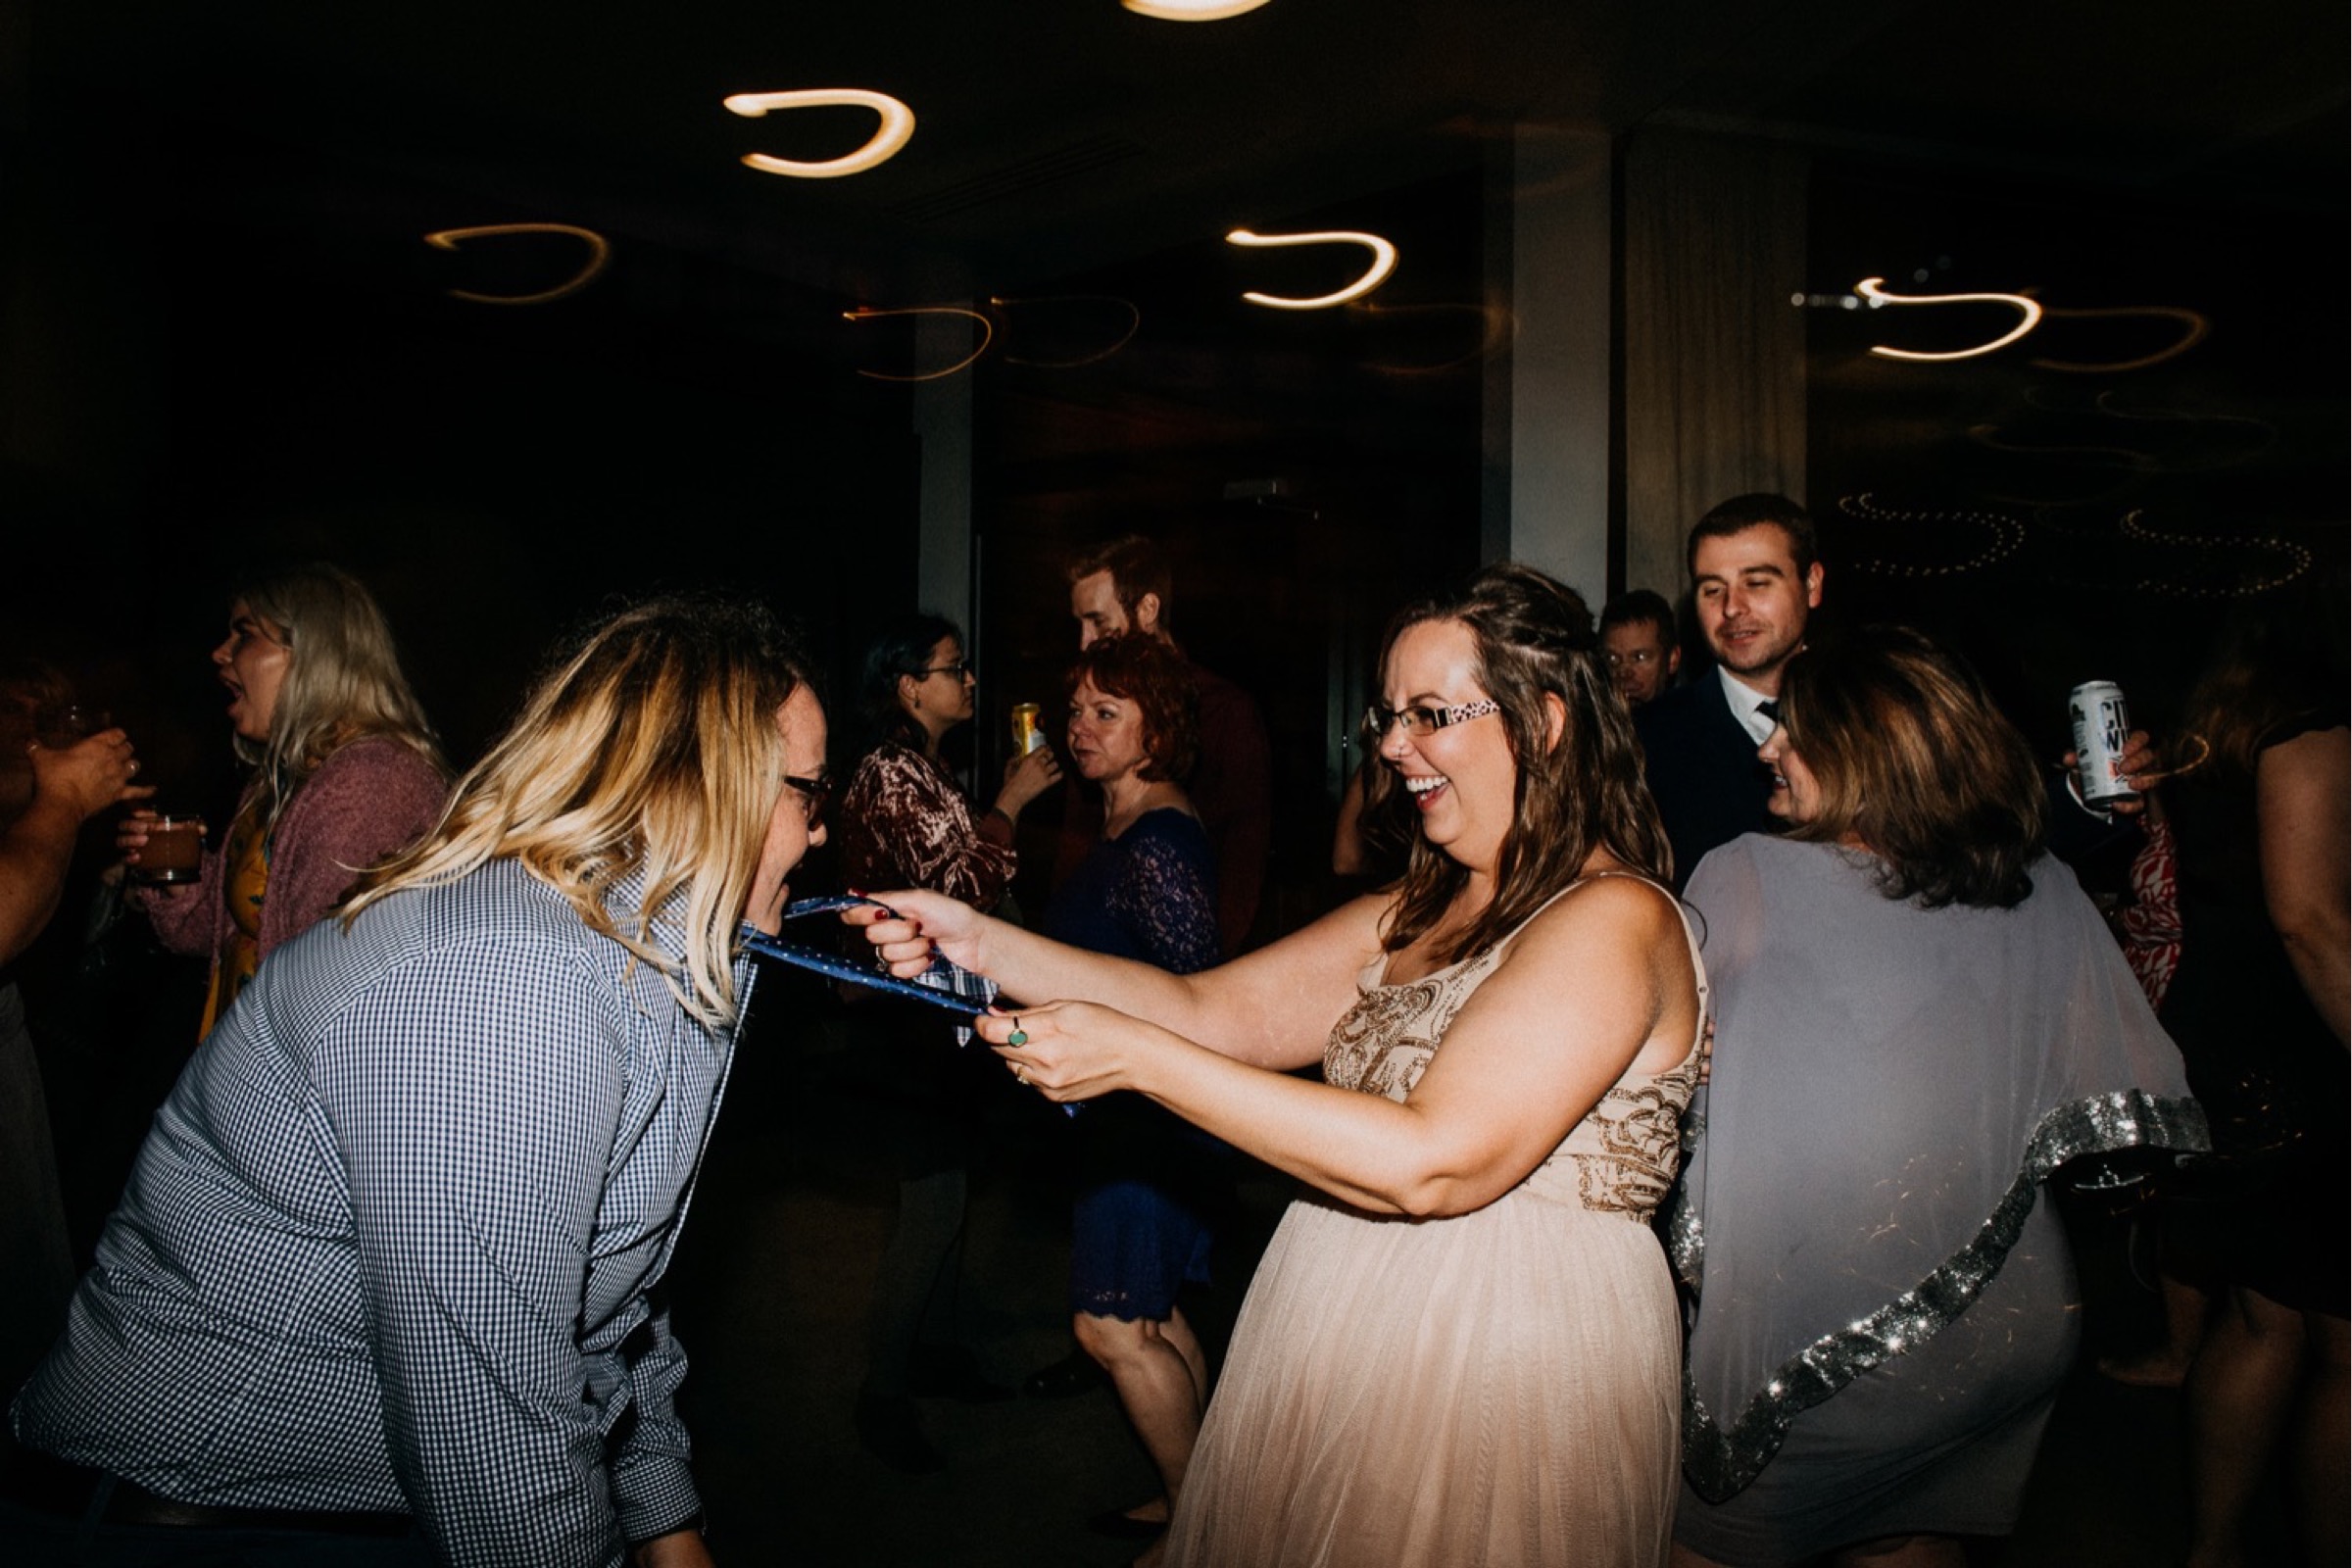 Guests dance and have fun during the reception portion of the wedding day timeline